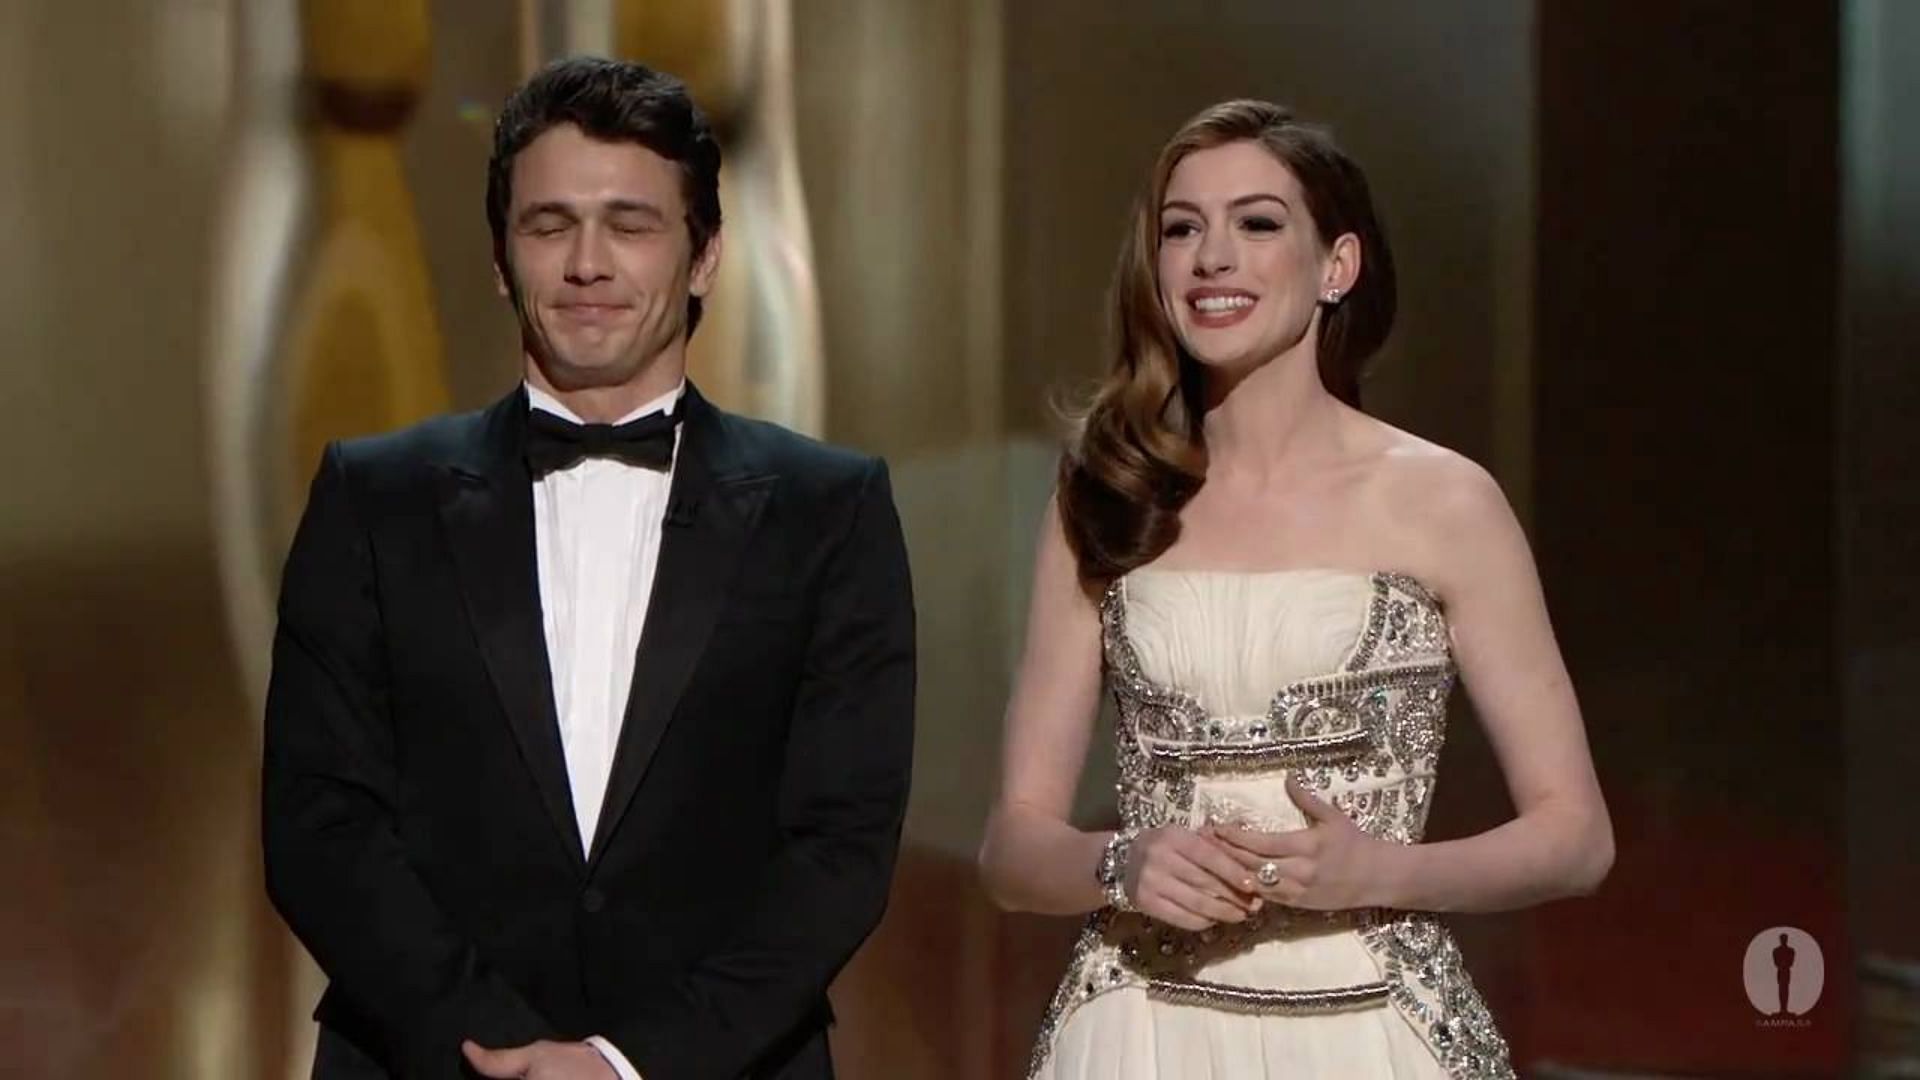 Anne Hathaway and James Franco (Image via YouTube)